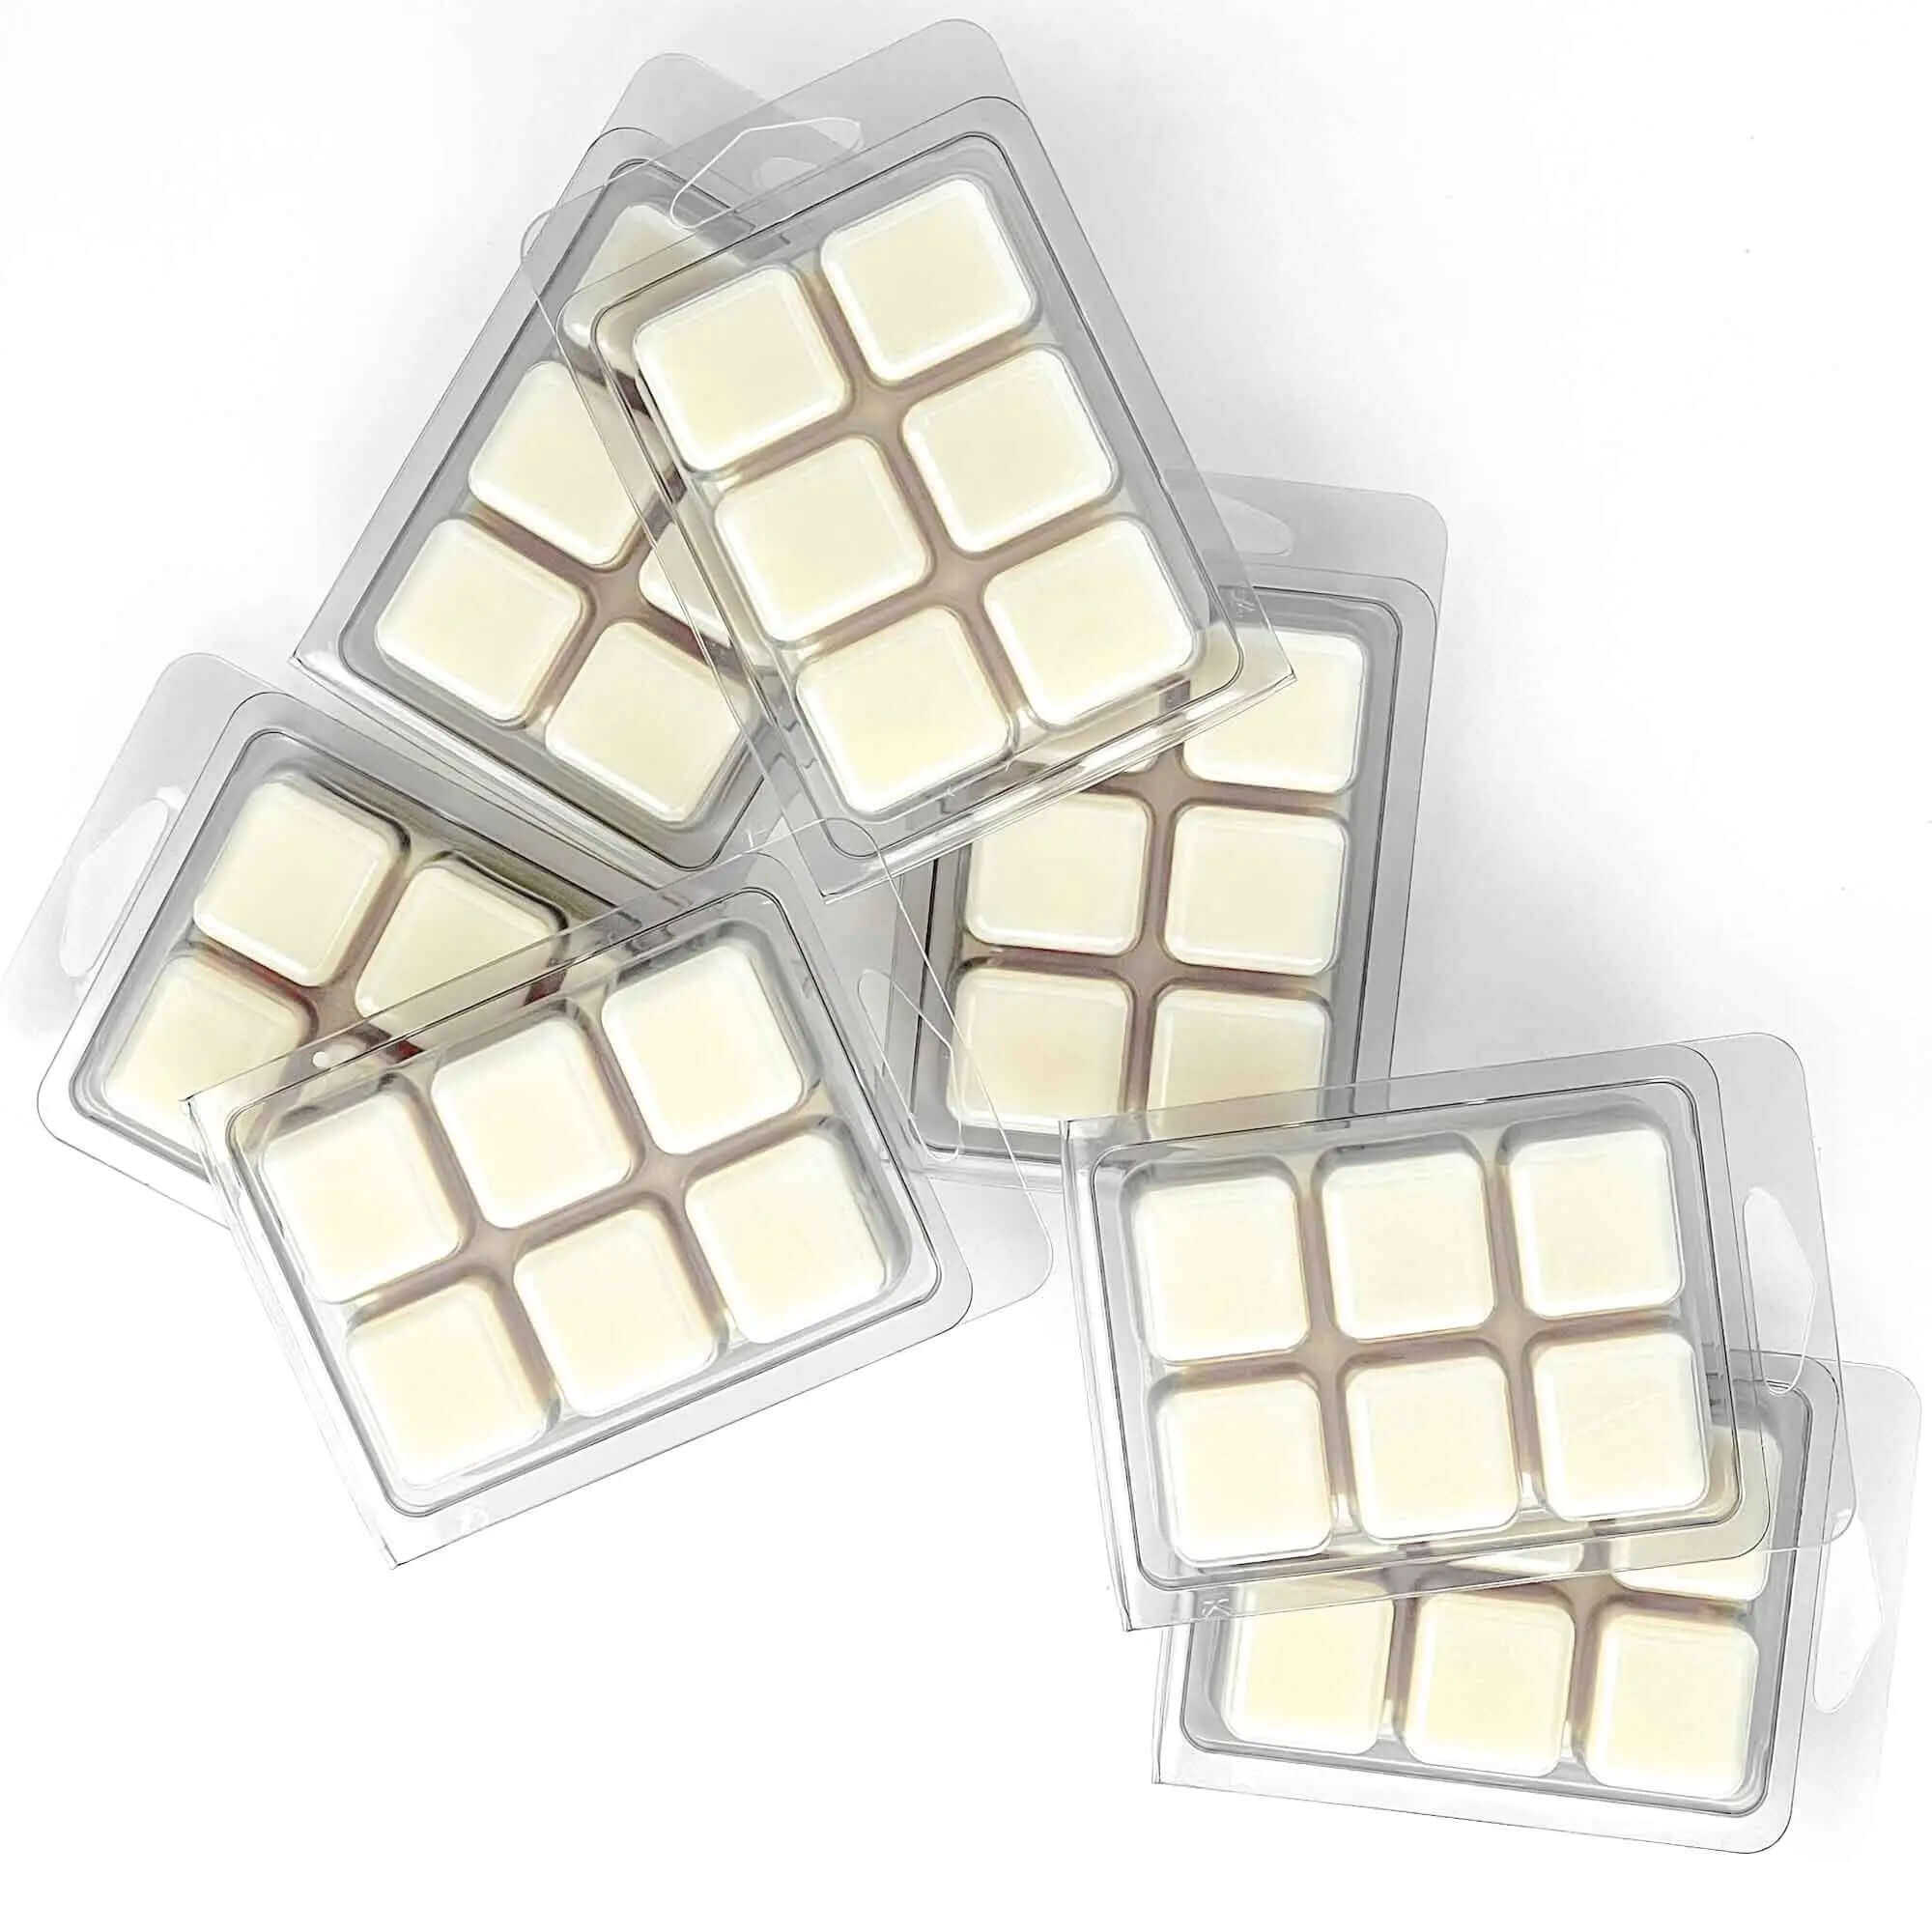 Group of Soy Wax Melts by Grand Candles